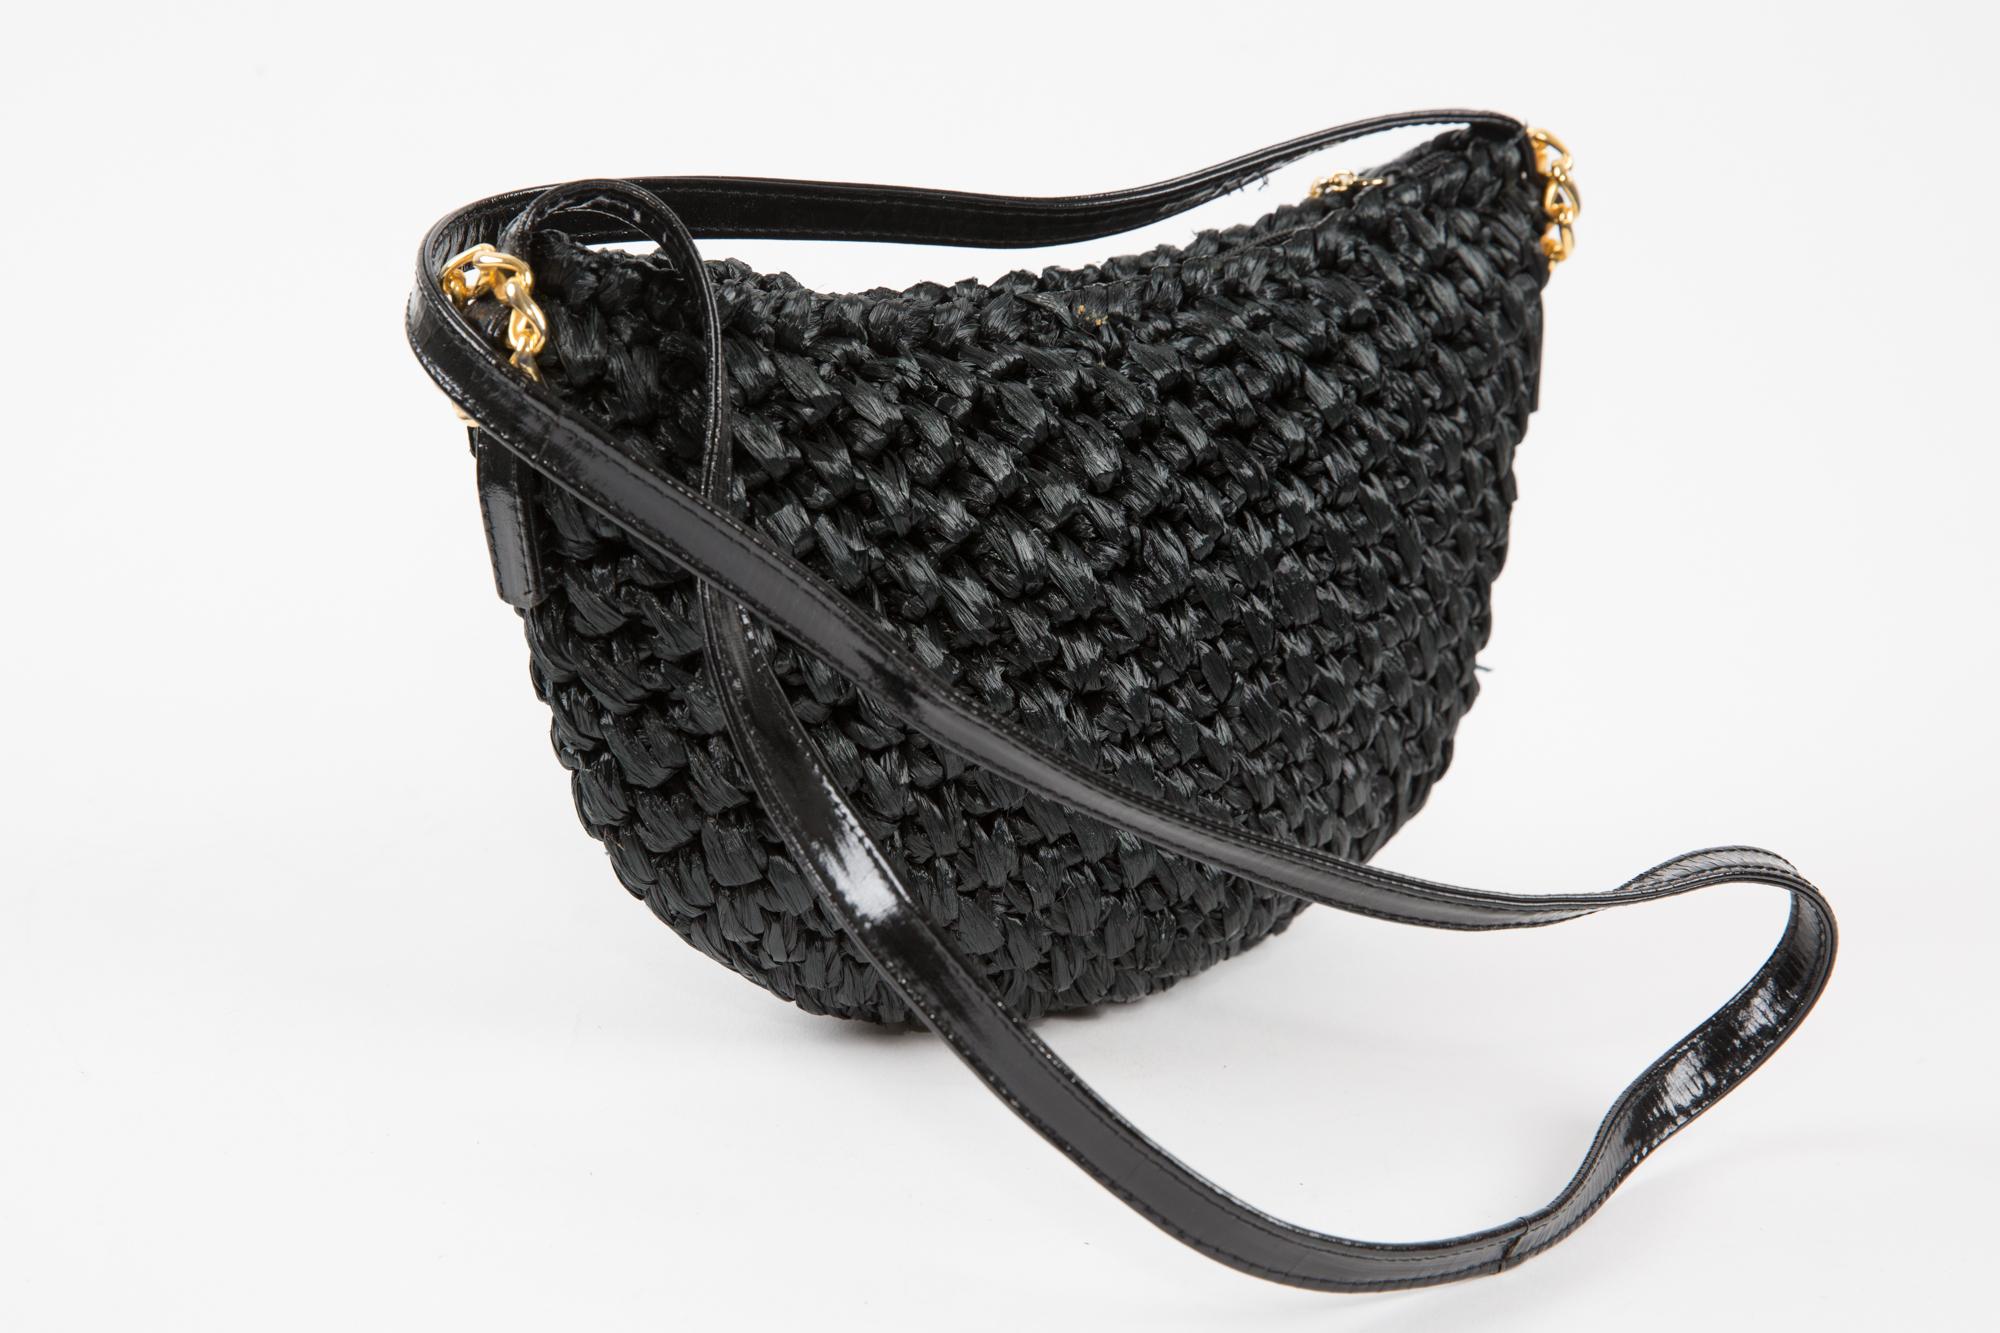 Rodo black raffia shoulder bag featuring a woven raffia pattern, a  long shape, a shoulder tarnish leather handle (length: 43in (109cm))  gold- tone hardware, a top zipped logo fastening, and inside plaque and an inside pocket.
Circa: 1980s
In good